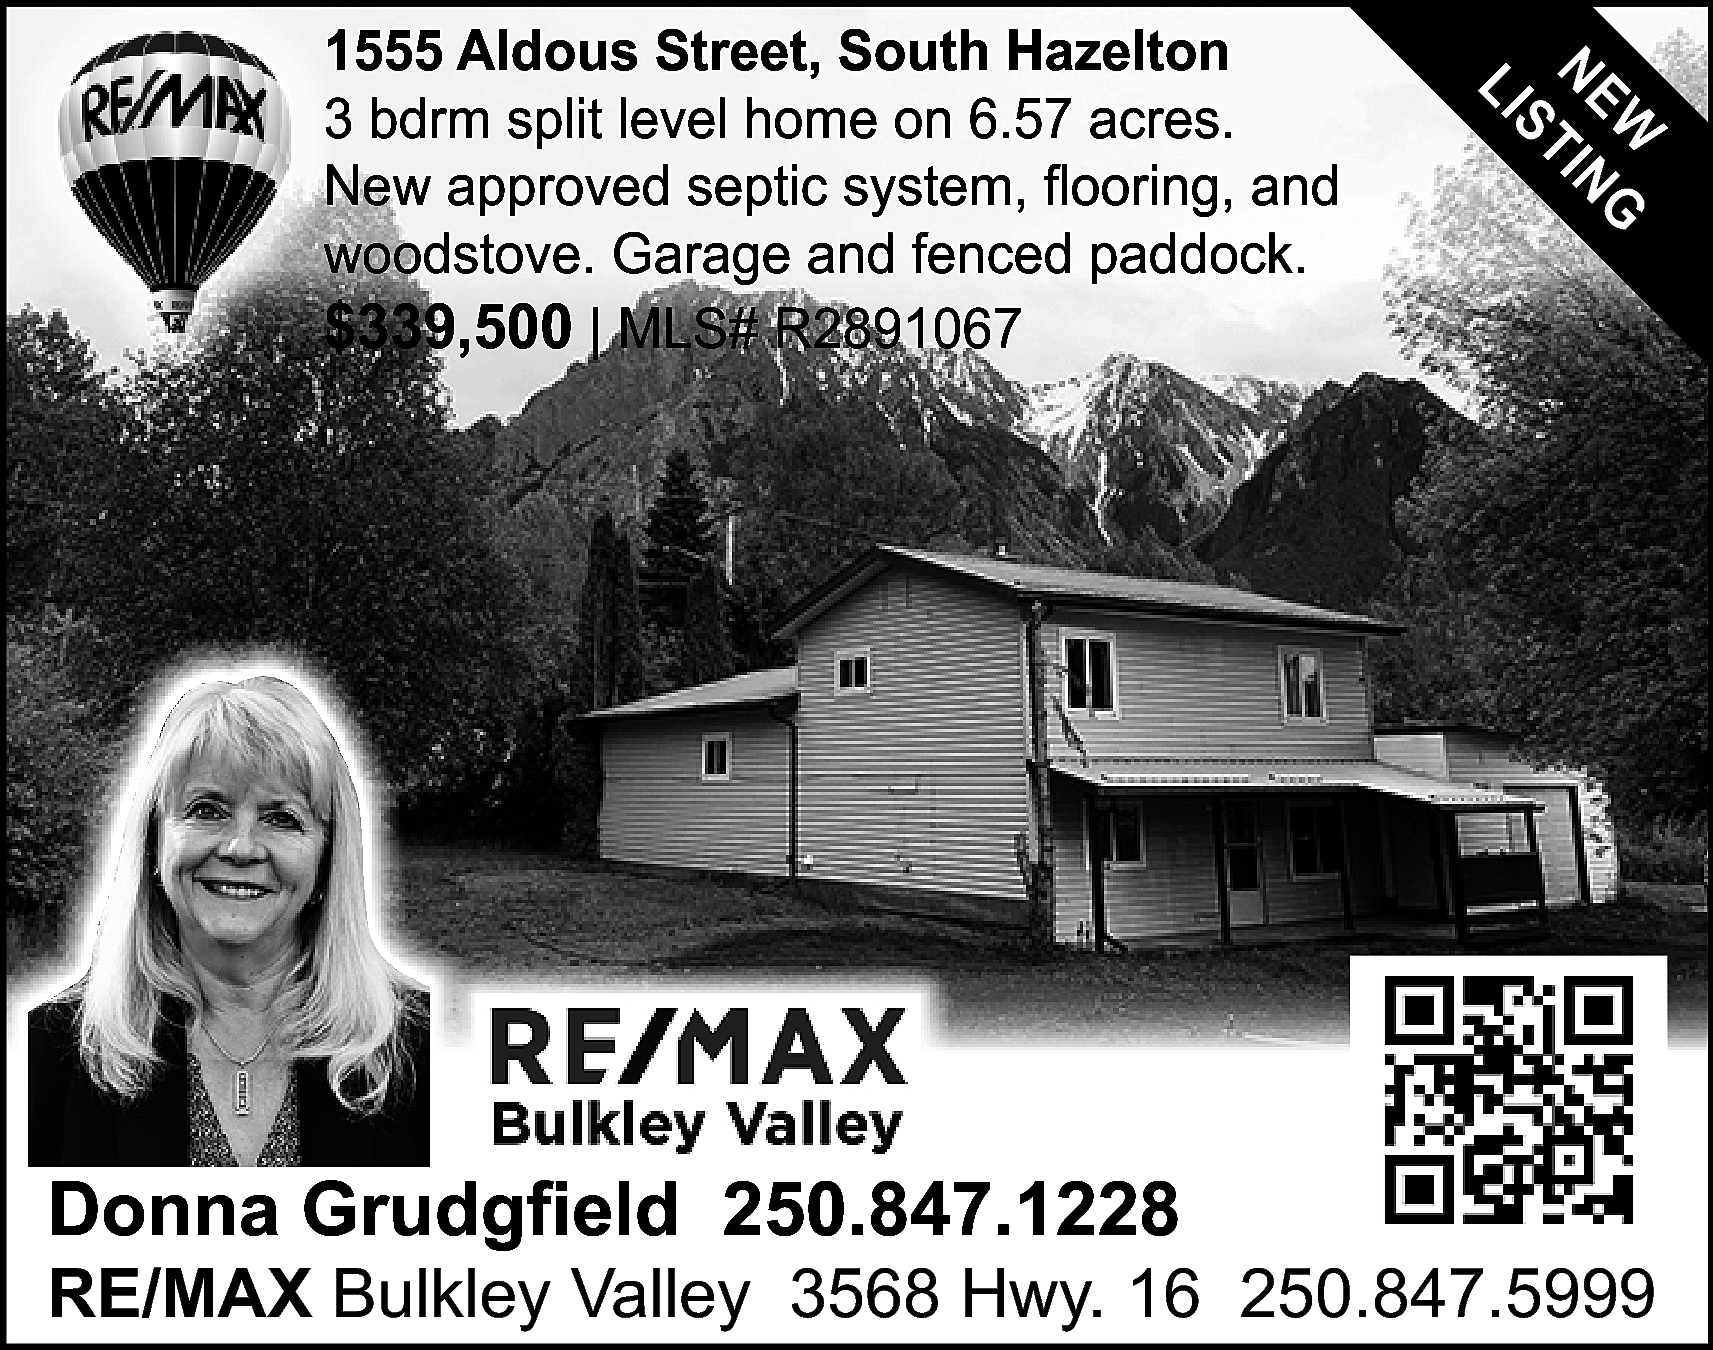 Donna Grudgfield 250.847.1228 <br> <br>W  Donna Grudgfield 250.847.1228    W G  NE TIN  S  LI    1555 Aldous Street, South Hazelton  3 bdrm split level home on 6.57 acres.  New approved septic system, flooring, and  woodstove. Garage and fenced paddock.  $339,500 | MLS# R2891067    RE/MAX Bulkley Valley 3568 Hwy. 16 250.847.5999    